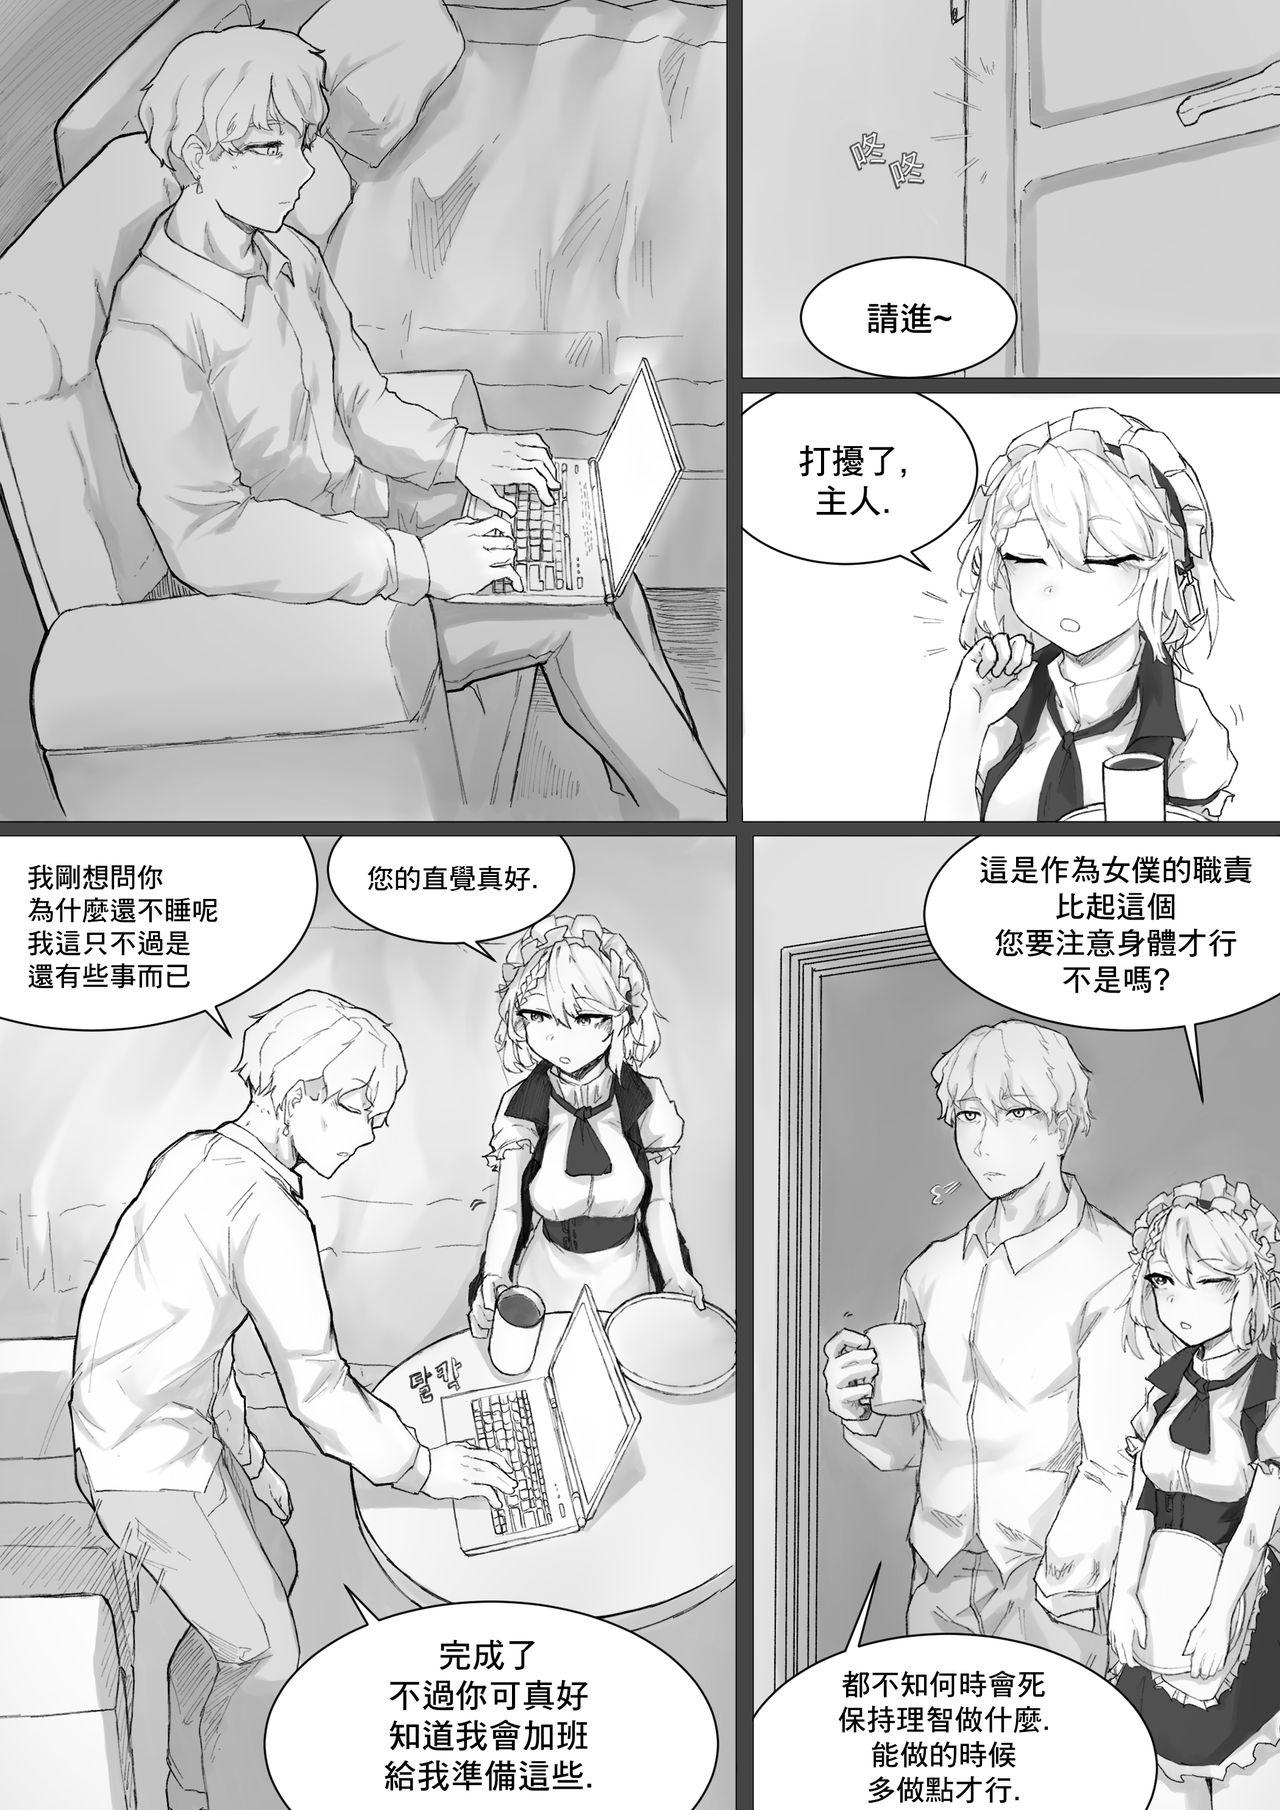 Goth How To Use G36 - Girls frontline Blowing - Page 4